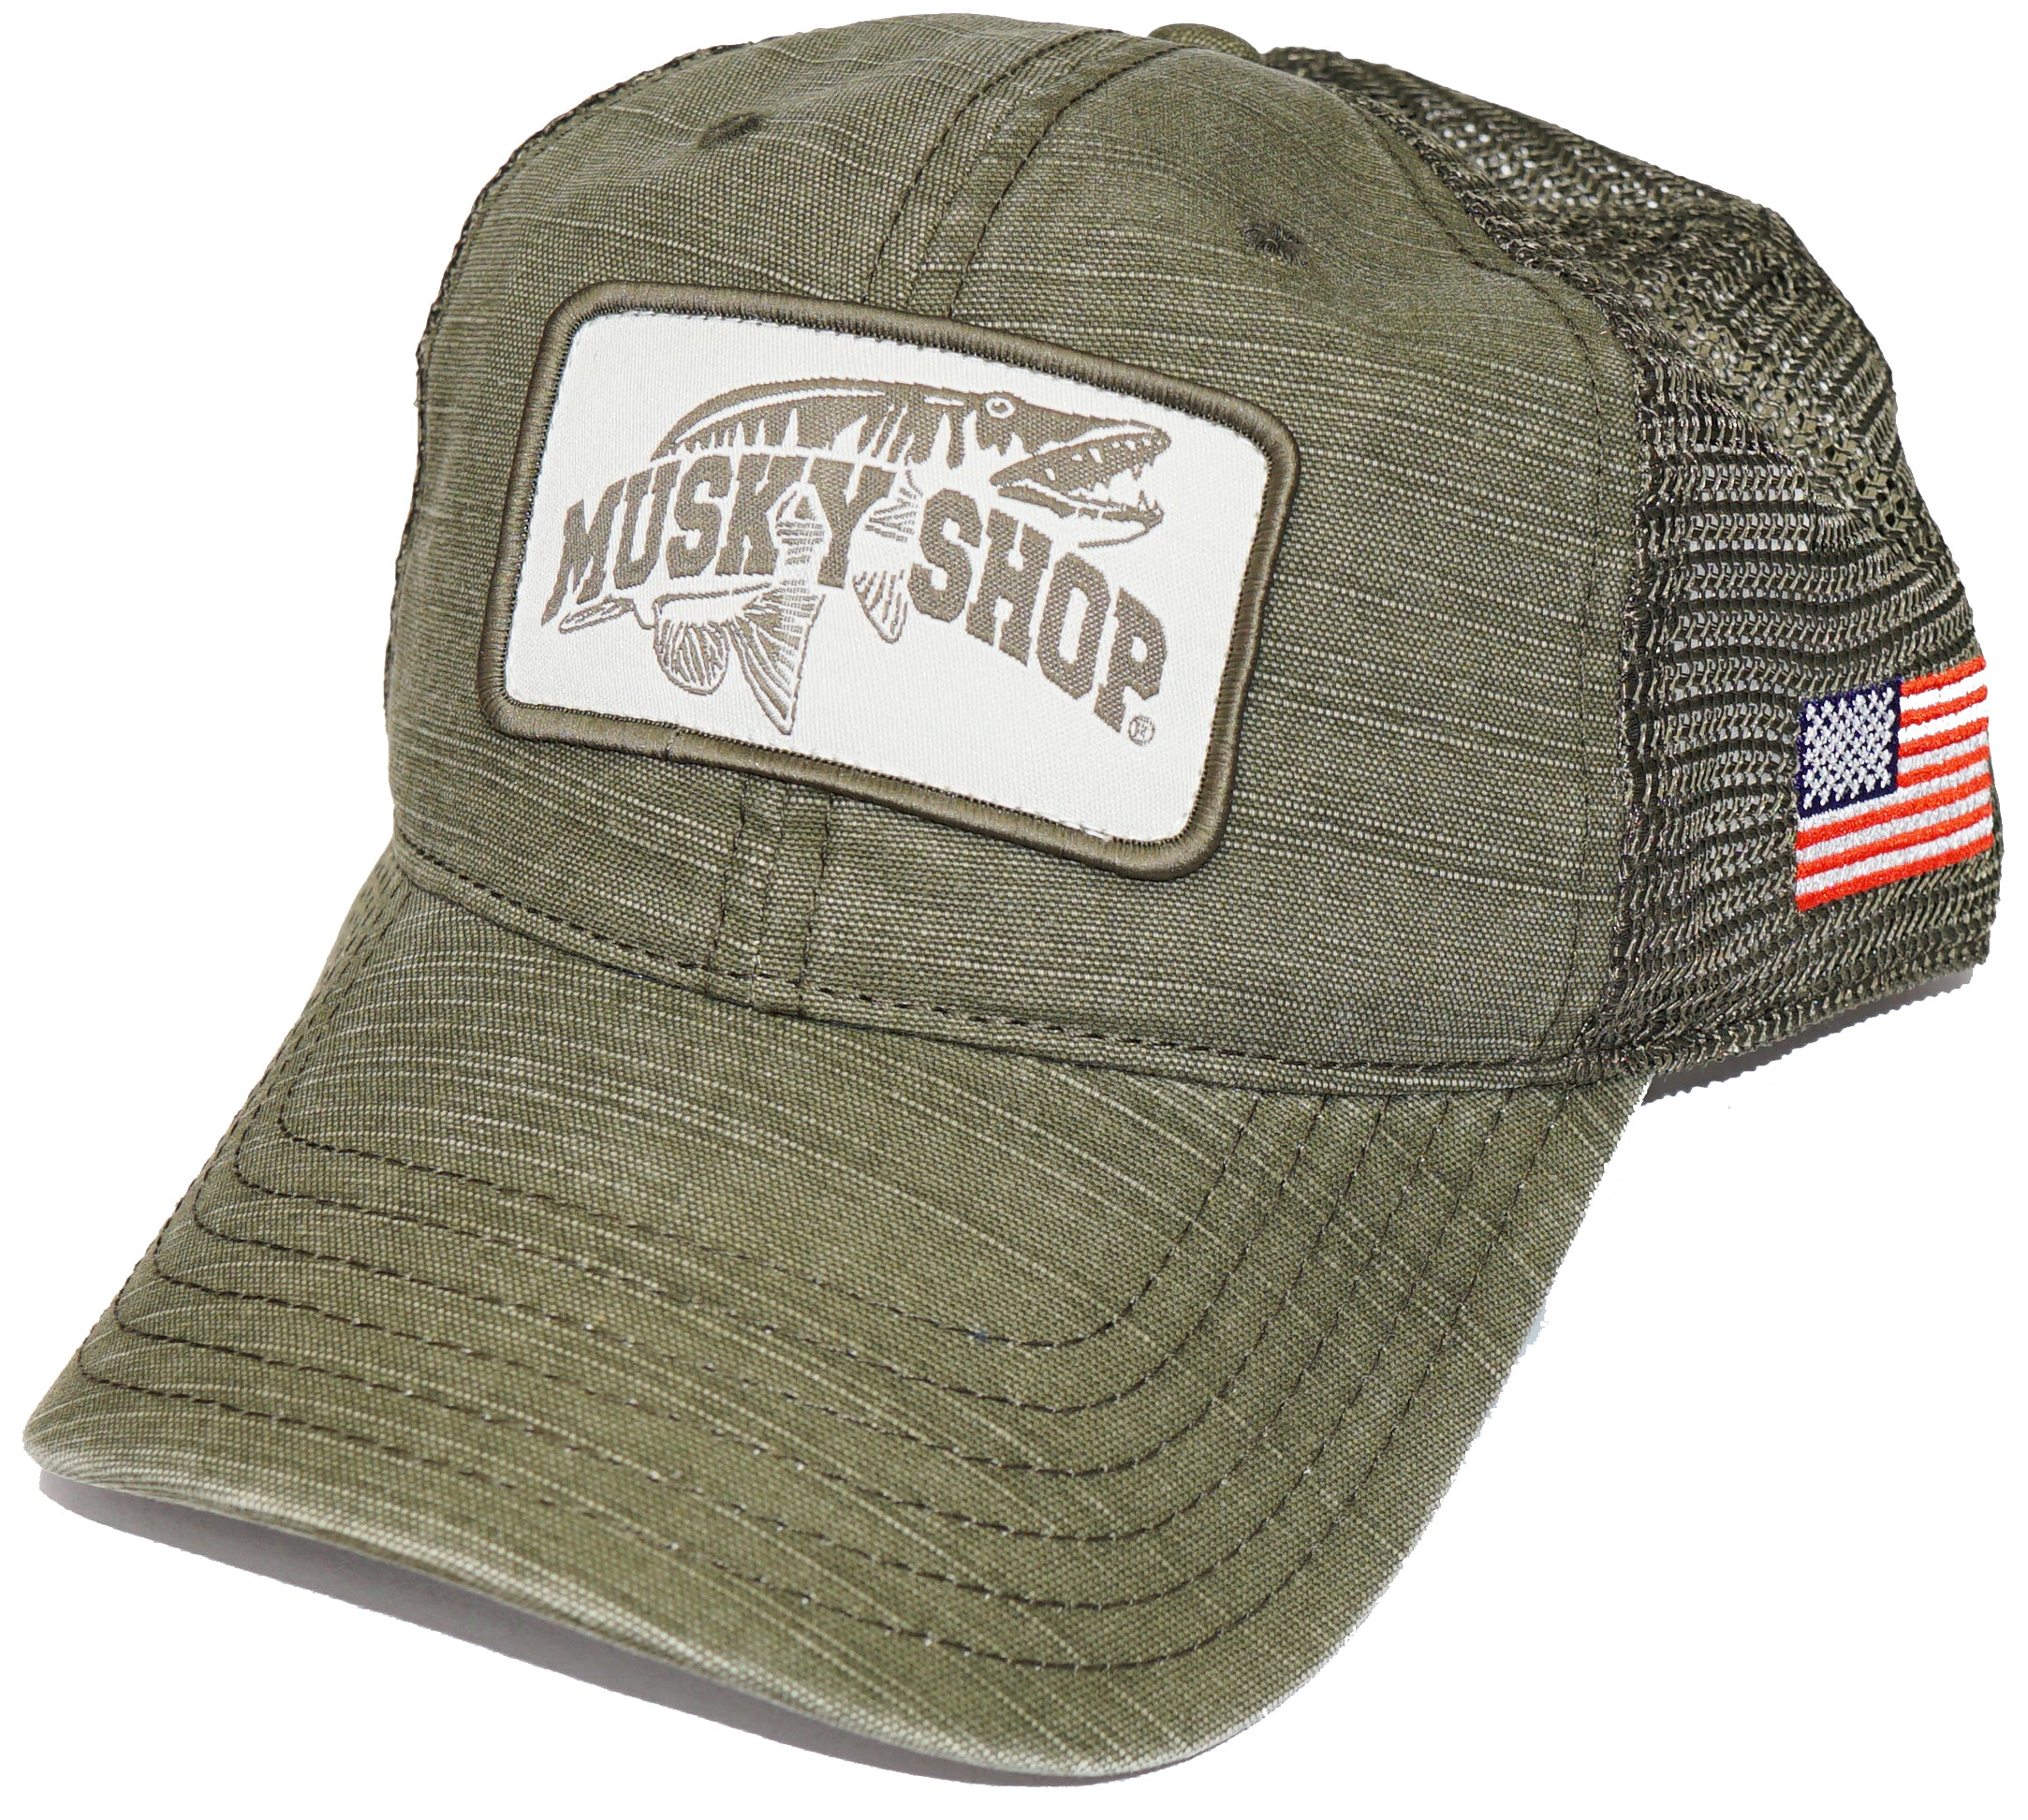 Musky Shop Washed Olive Patch Mesh Cap